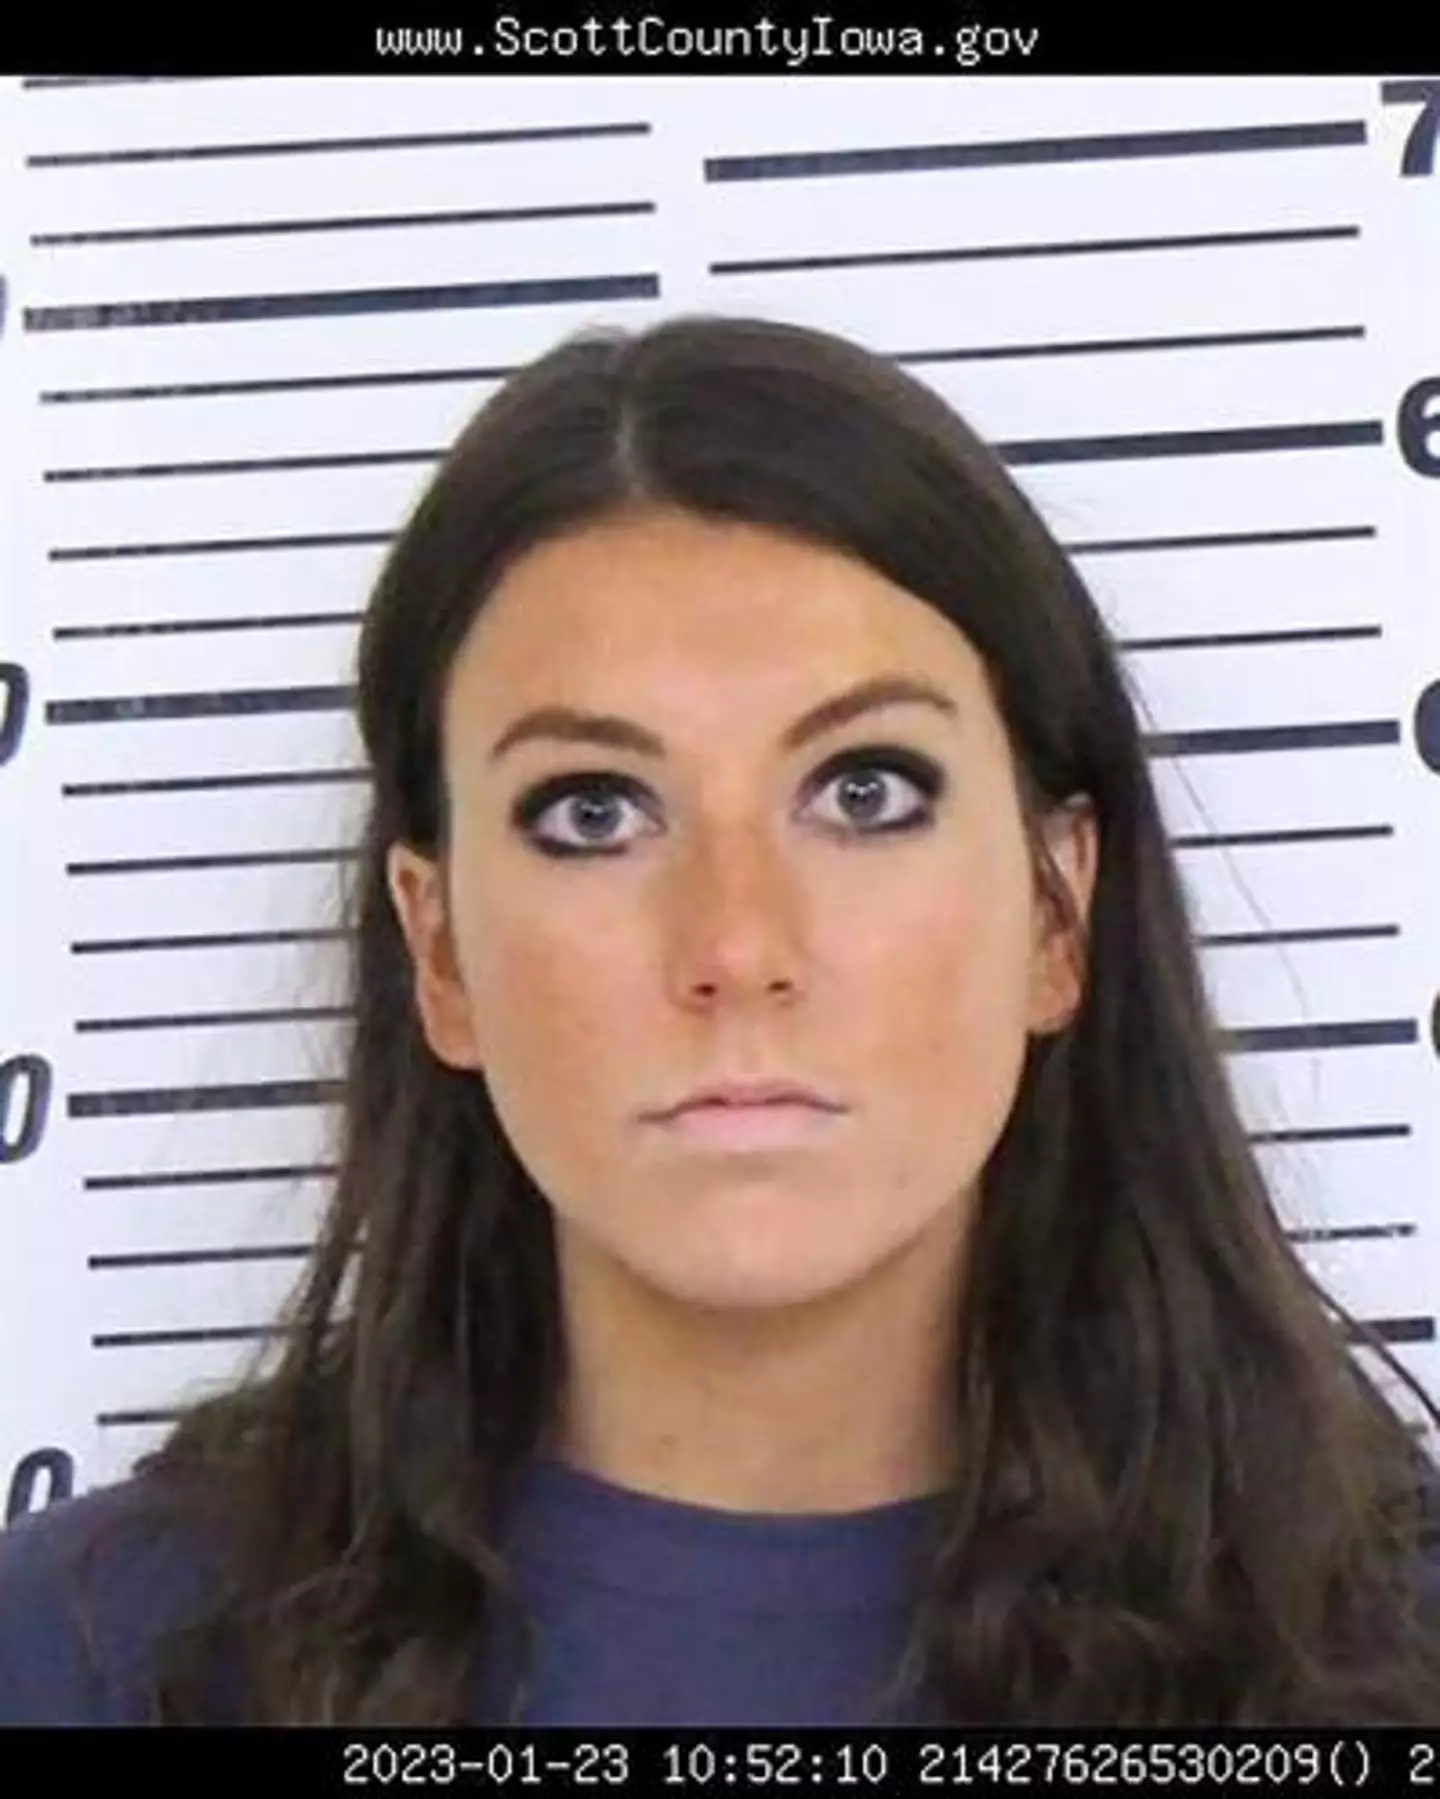 She was arrested in late January of this year.